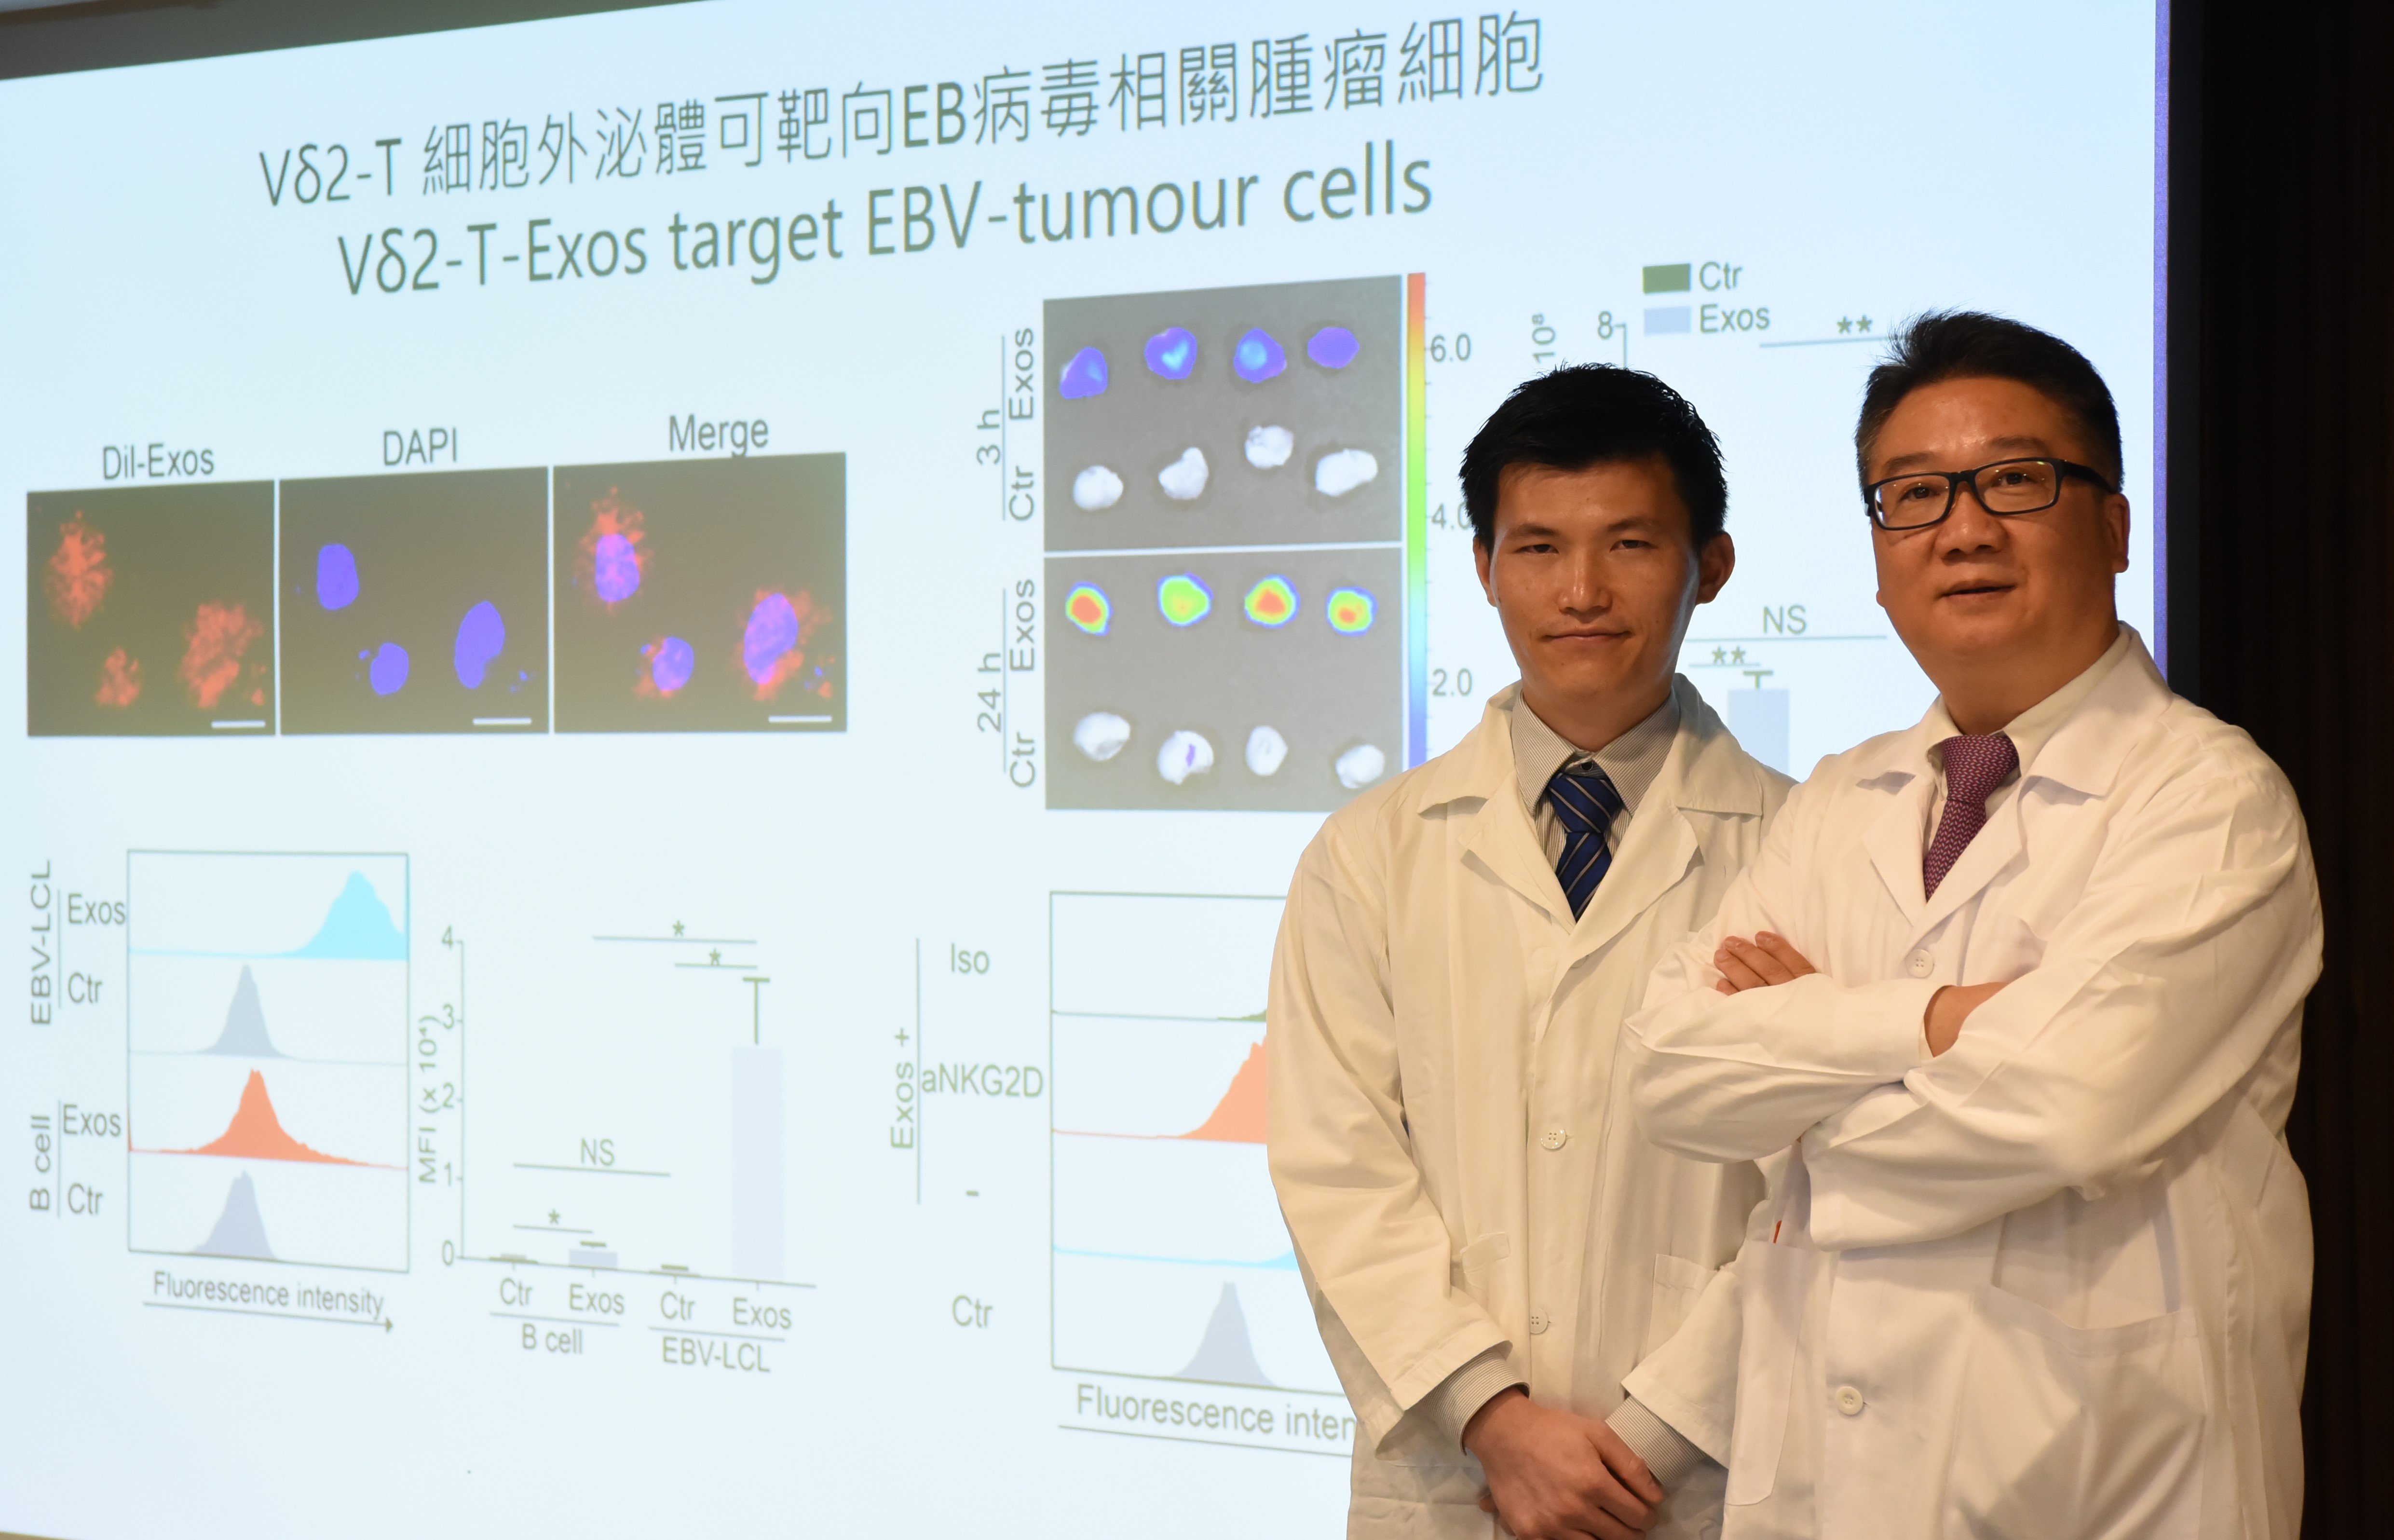 Professor Tu Wen-wei from HKUMed Paediatrics and Adolescent Medicine, who led the research, and Dr Wang Xi-wei, who is the first author.